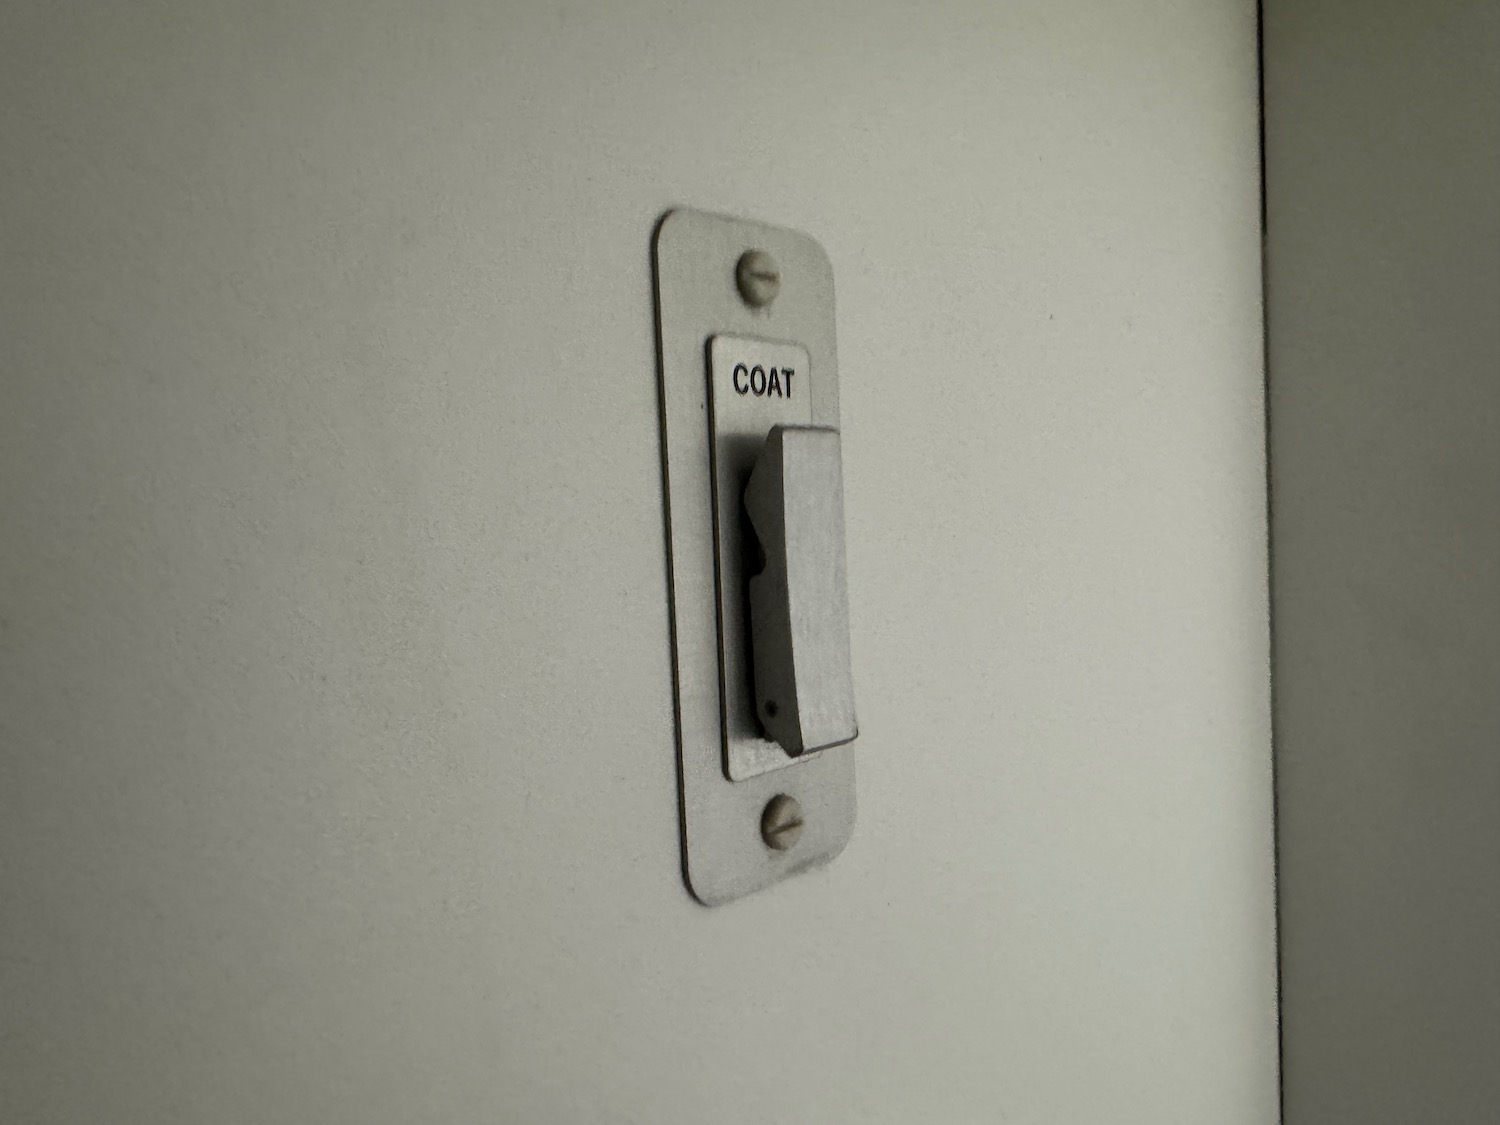 a light switch on a wall